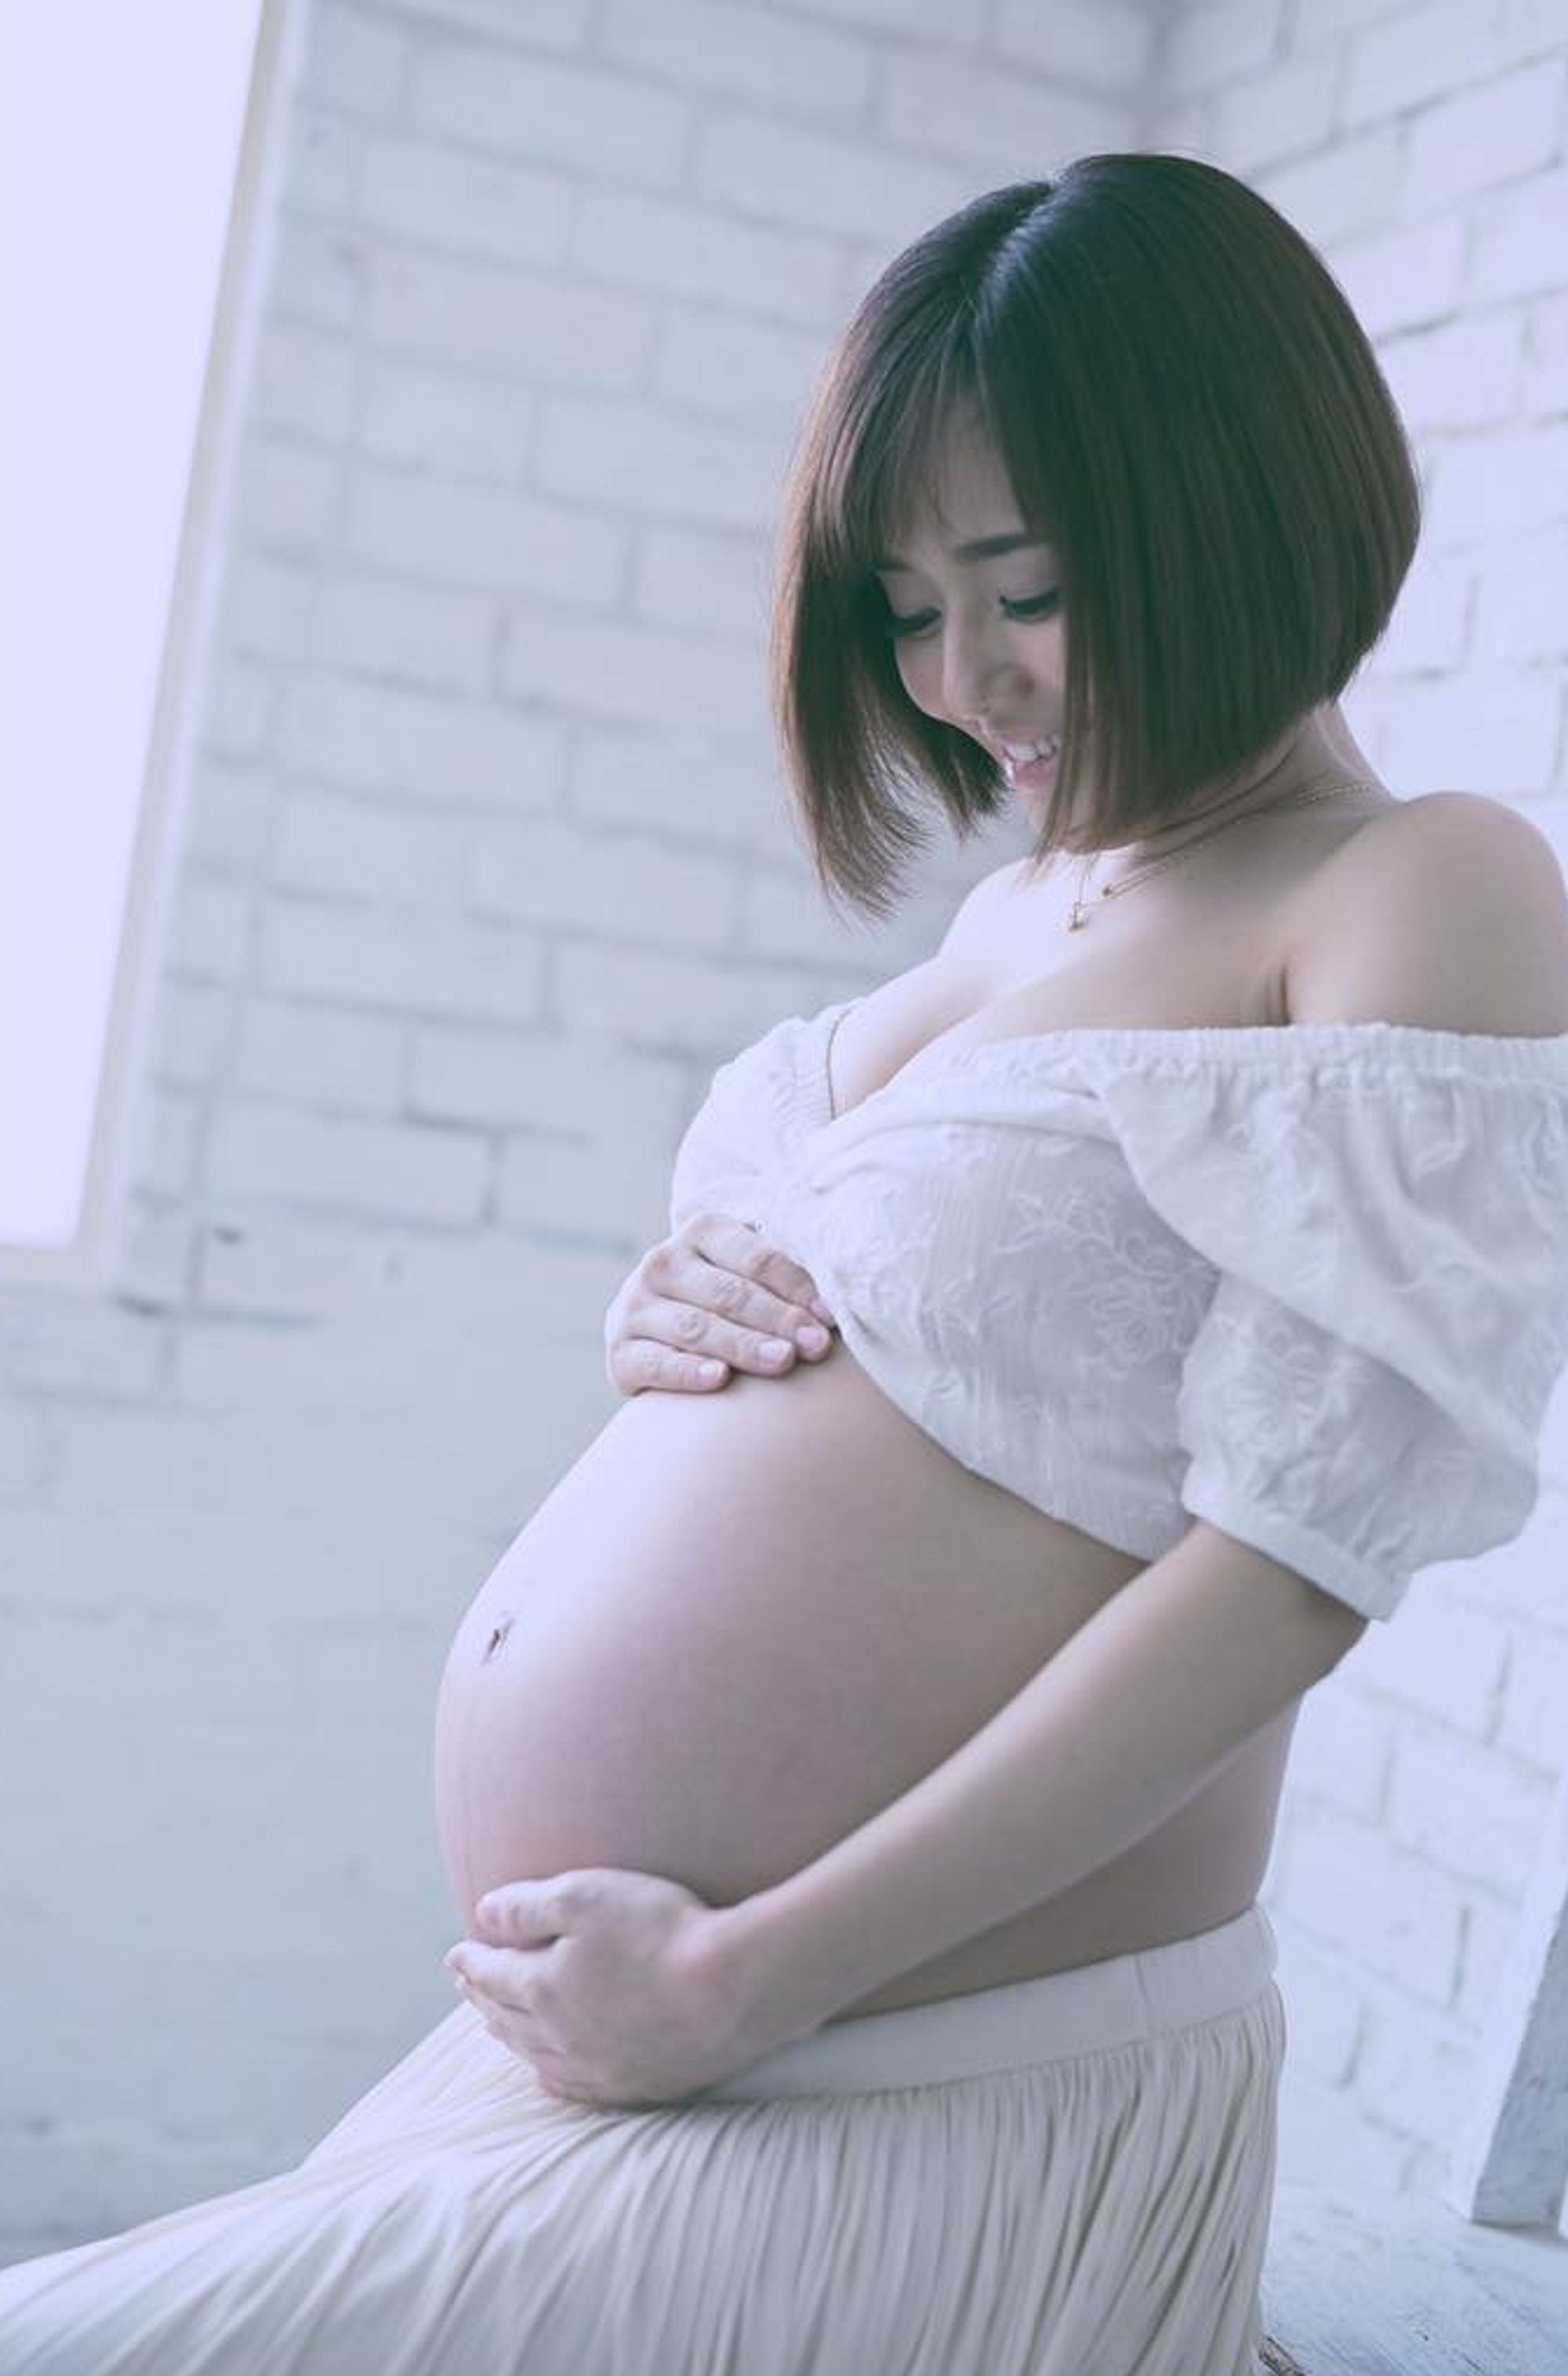 Asian Teens Giving Birth - Sexy Porn Star To Live Stream Twins Birth By C-Section ...